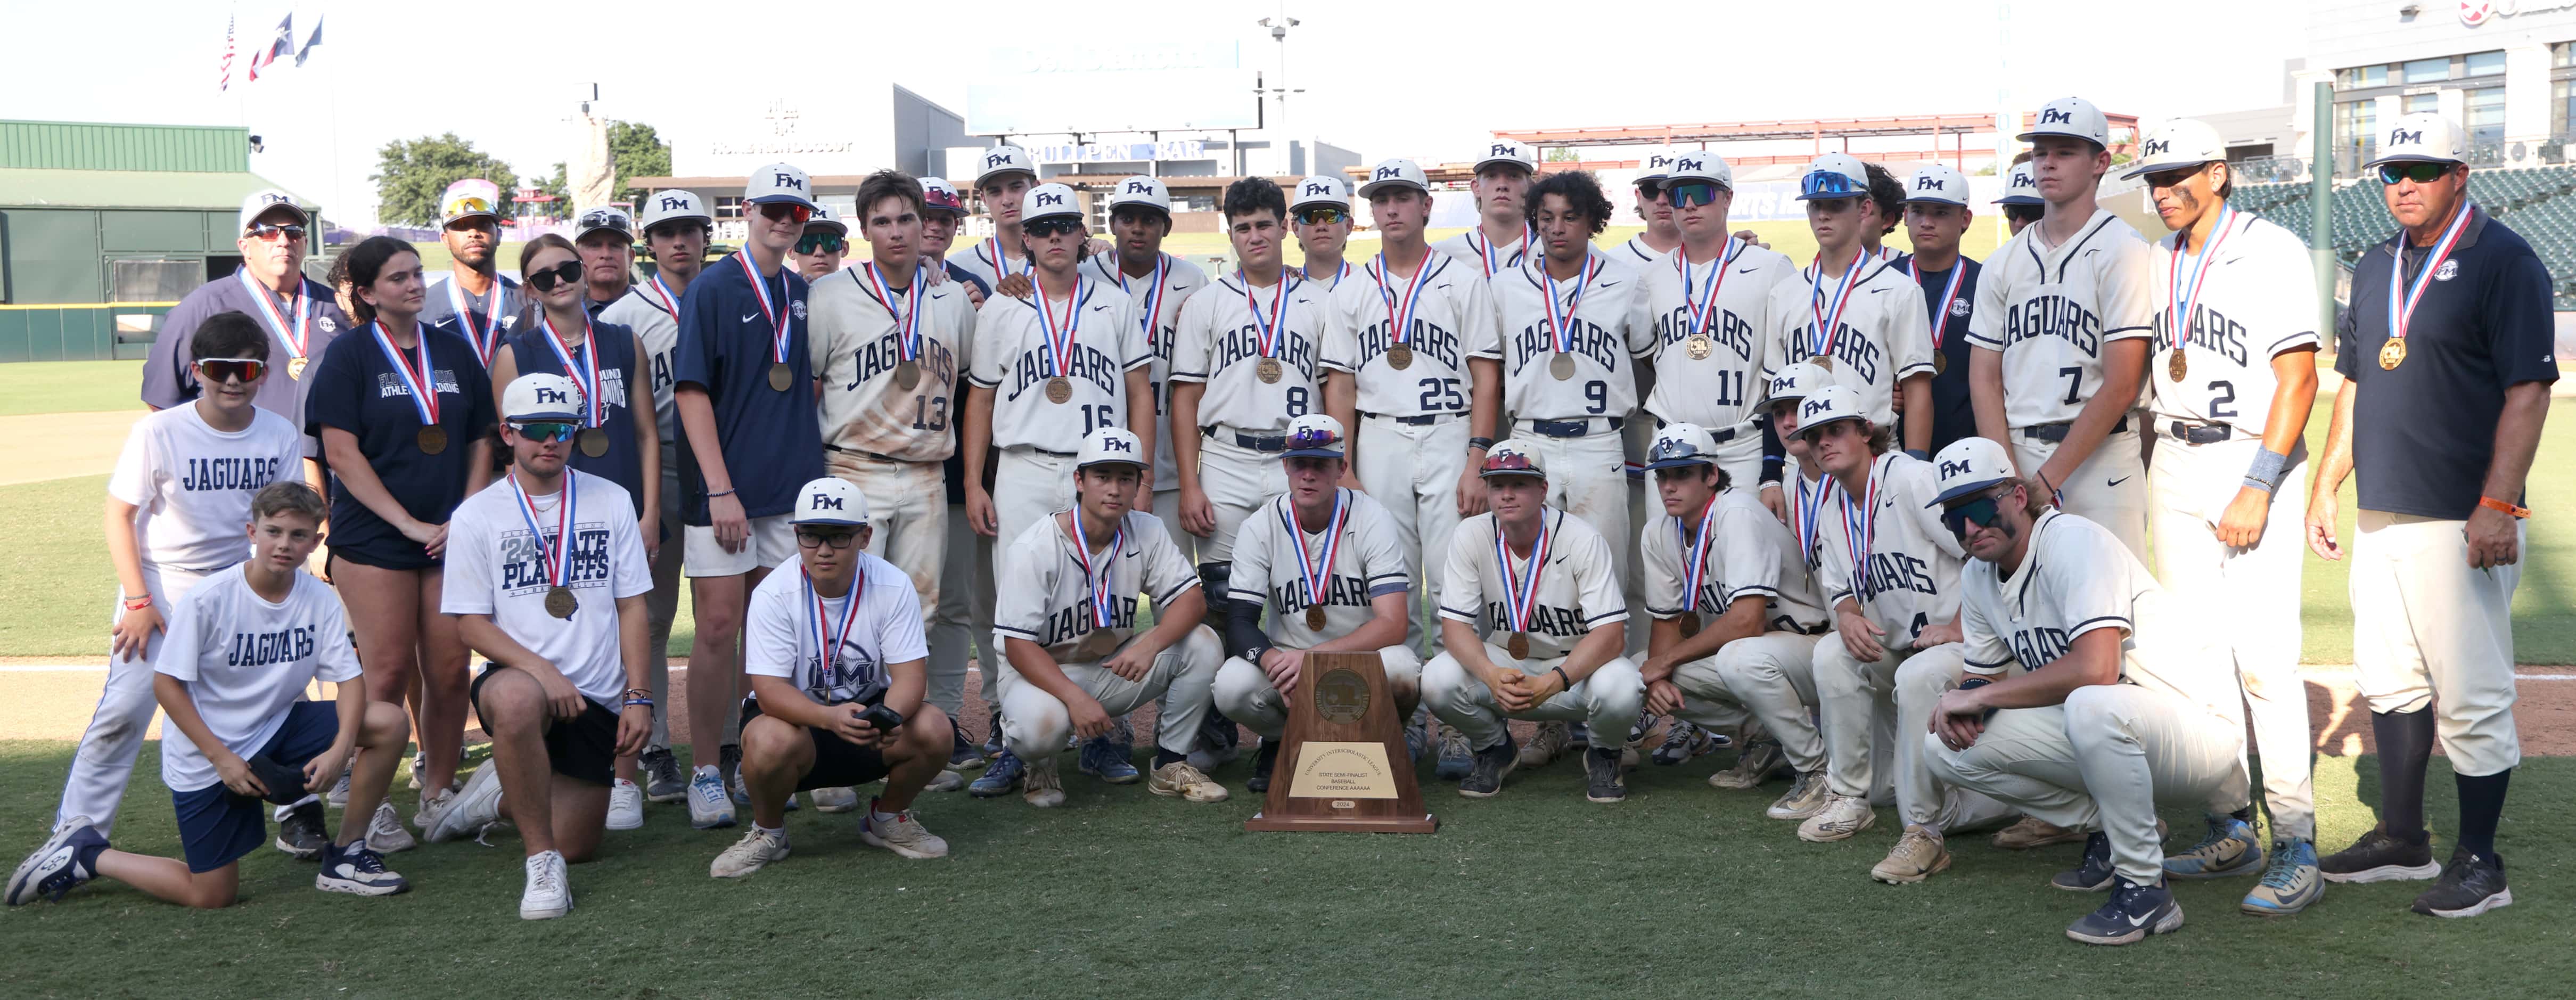 Flower Mound players pose for a team photo with their Class 6A state semi-finalist trophy...